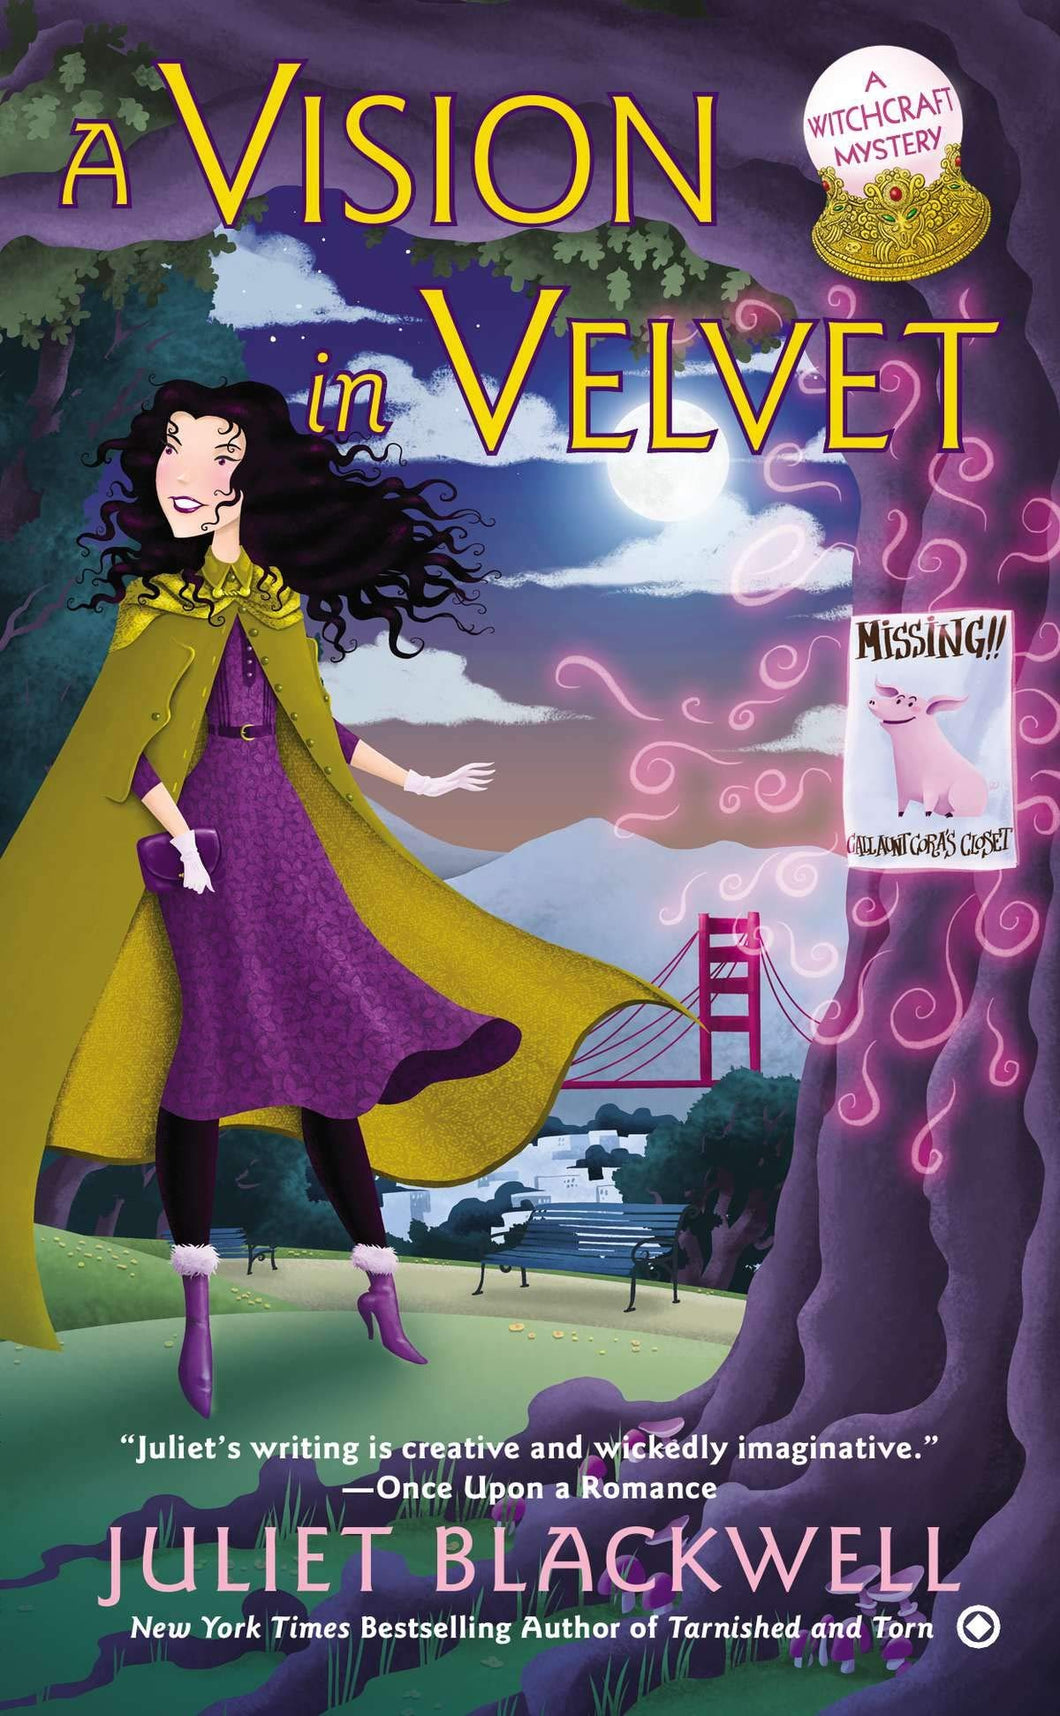 A Vision in Velvet: A Witchcraft Mystery [Juliet Blackwell]